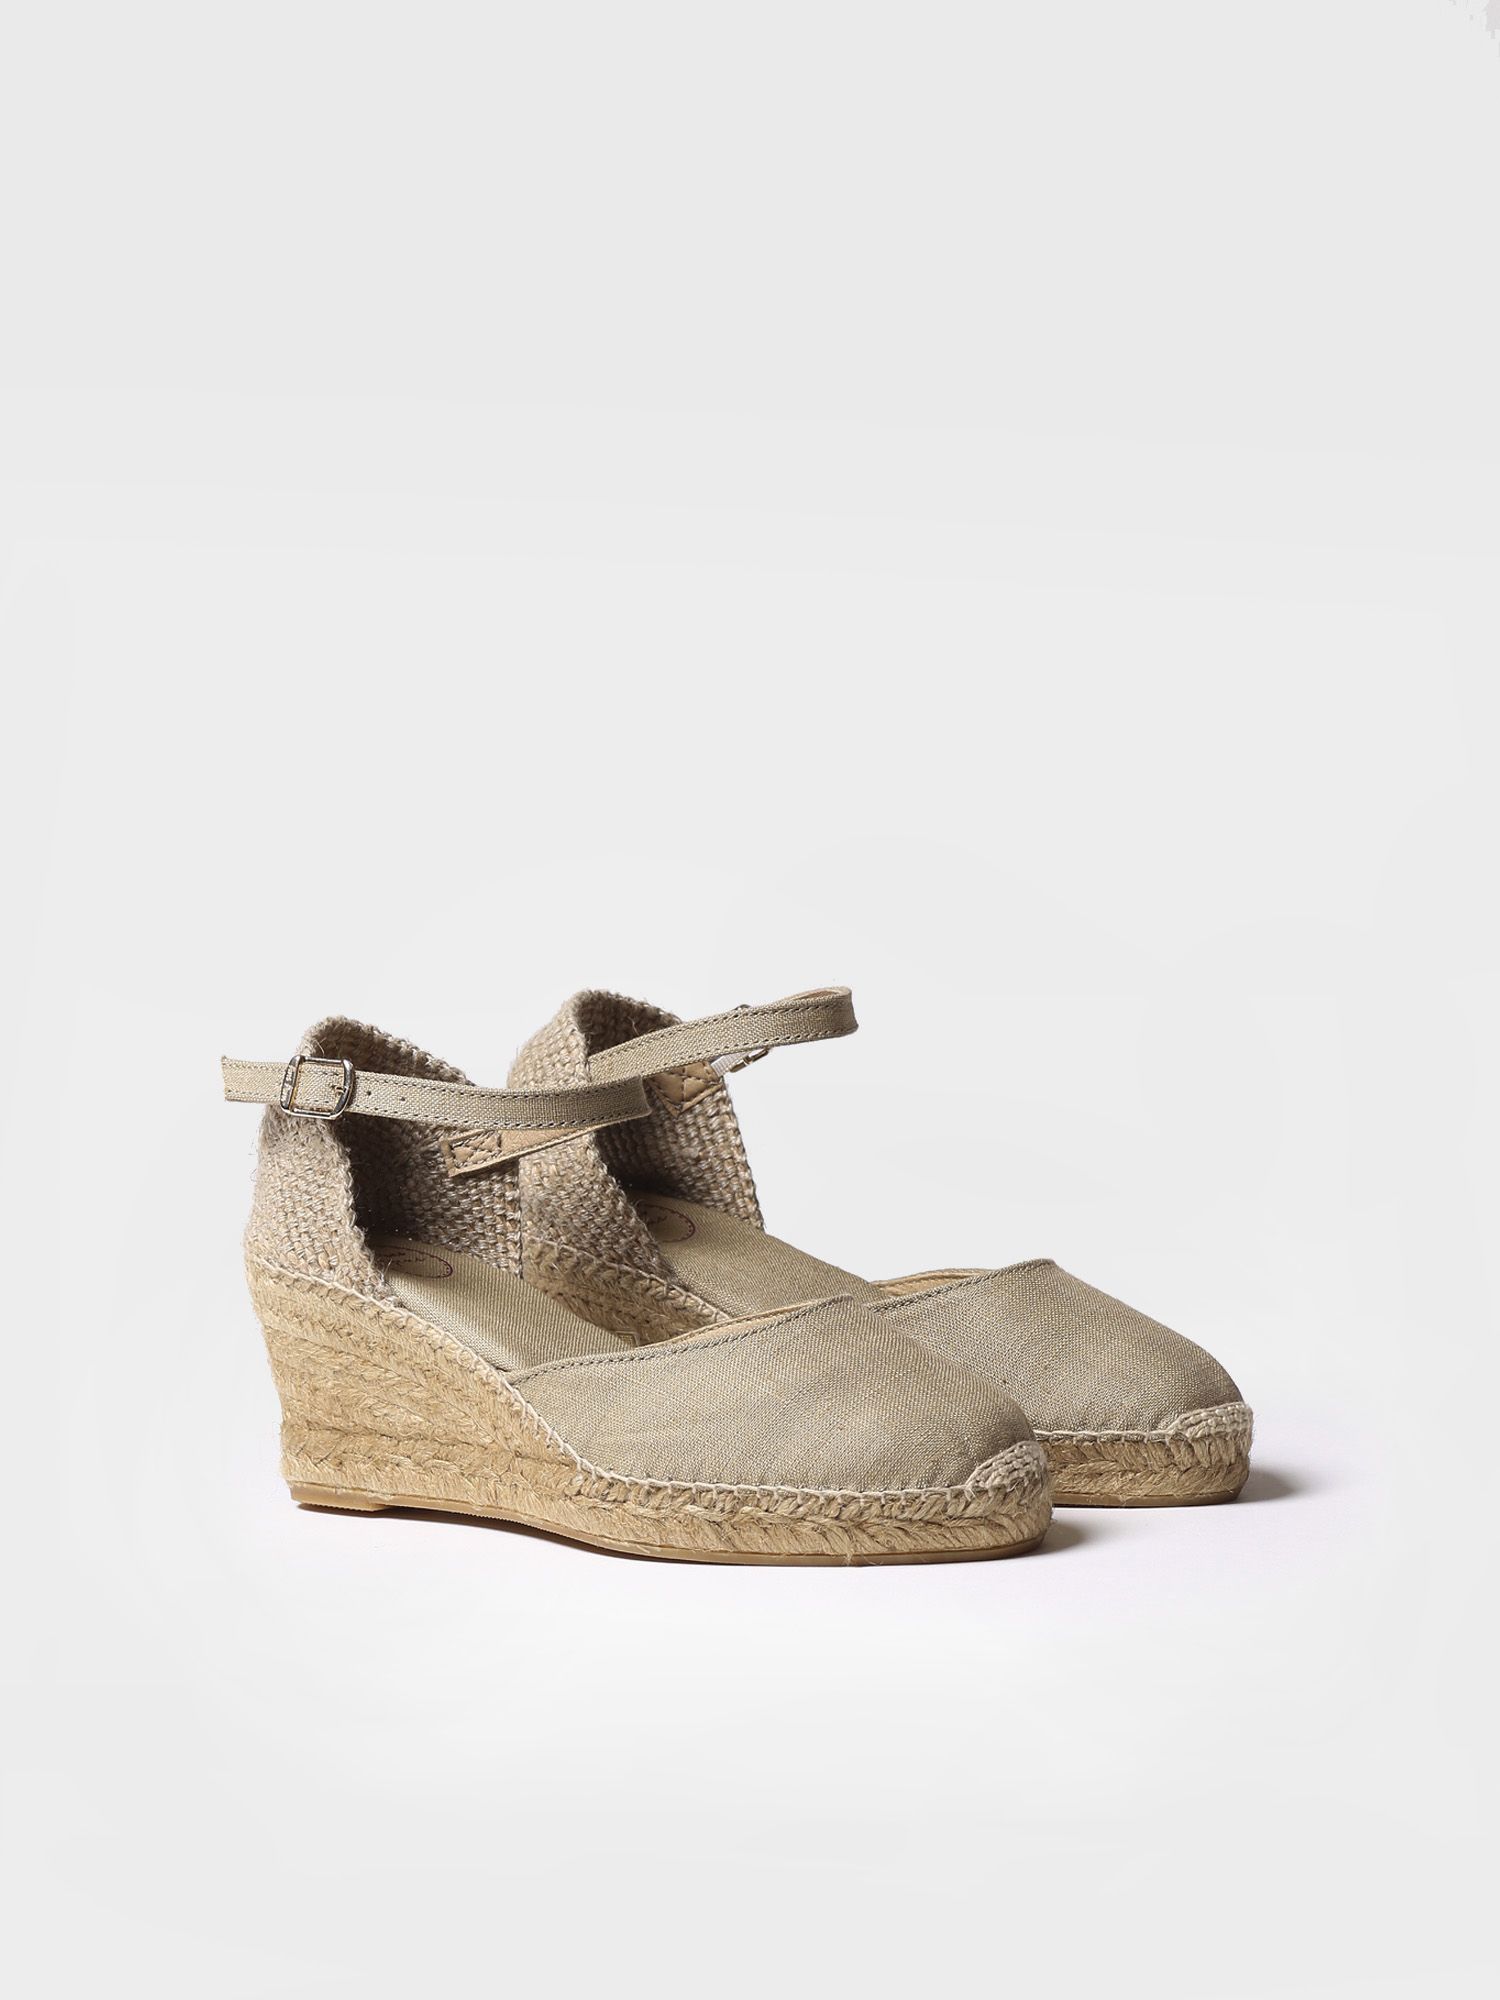 Vegan Espadrille for Woman Made in Linen. Toni Pons CALDES 